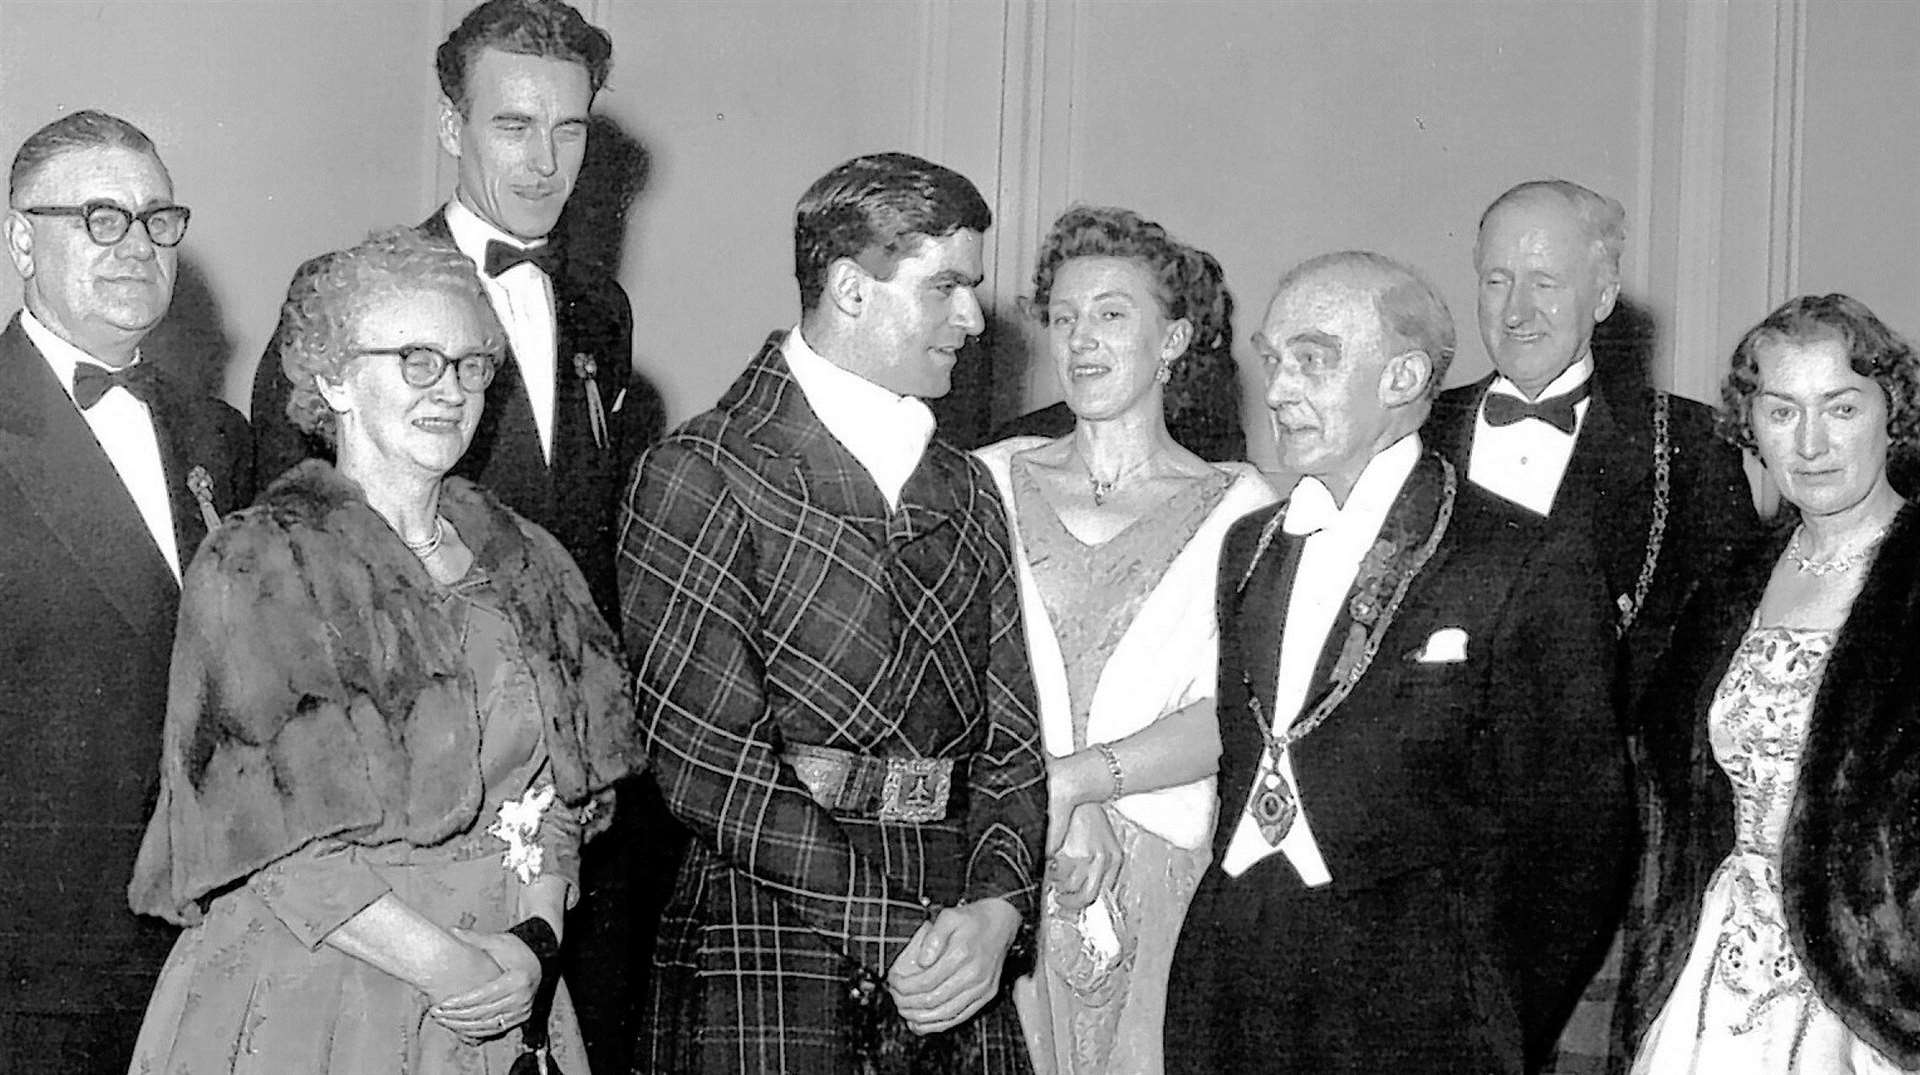 A group at the annual gathering of the Edinburgh Caithness Association in 1960. Robin Sinclair (centre), later to become Lord Thurso, was the guest of honour and is pictured with association office-bearers.